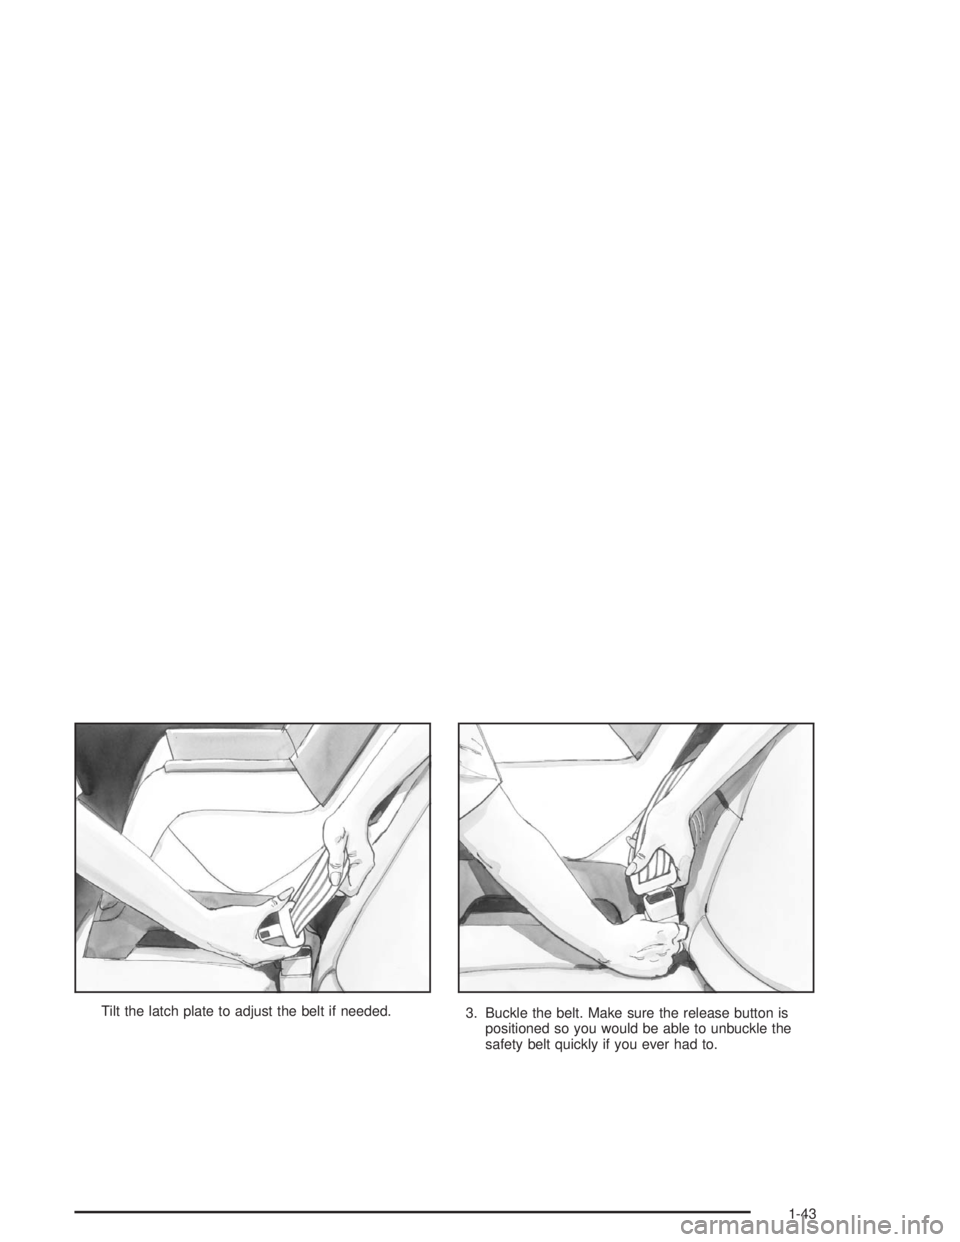 BUICK LESABRE 2004 Service Manual Tilt the latch plate to adjust the belt if needed.
3. Buckle the belt. Make sure the release button is
positioned so you would be able to unbuckle the
safety belt quickly if you ever had to.
1-43 